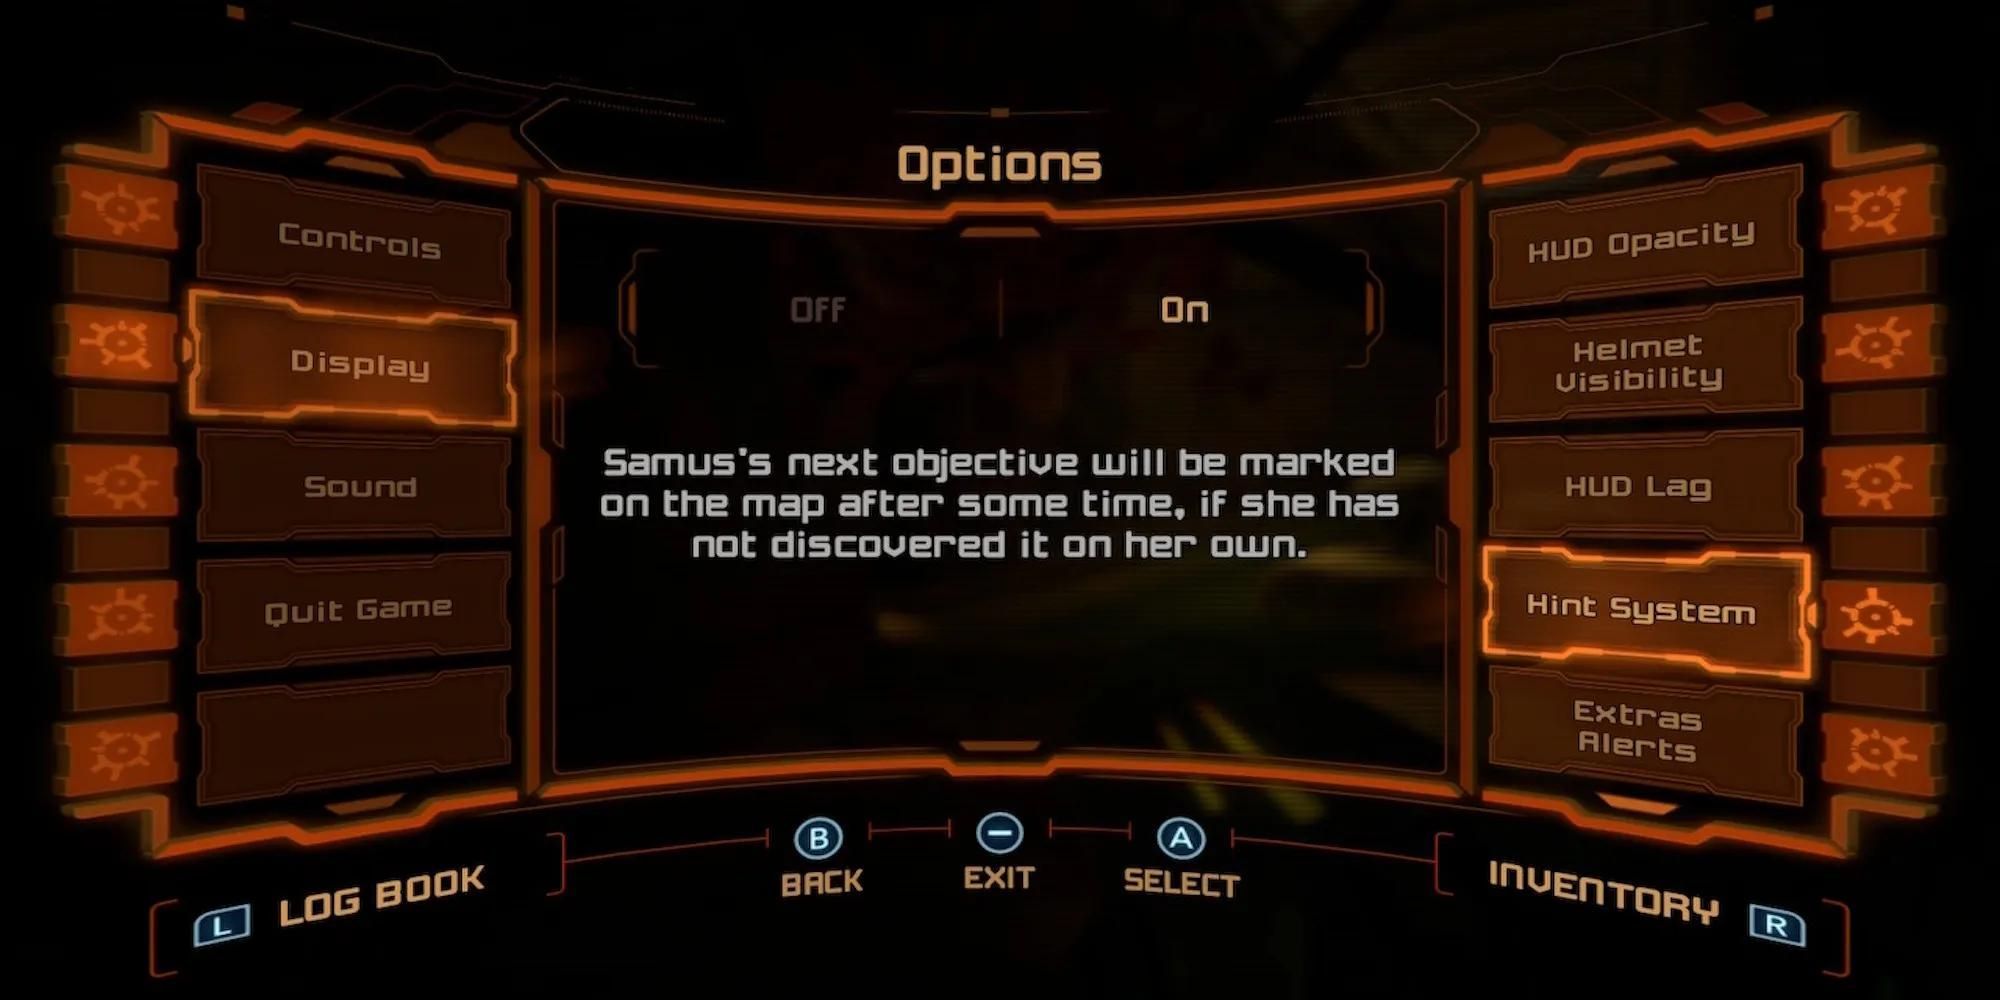 Metroid Prime Remastered Hint System Explanation in Options Menu